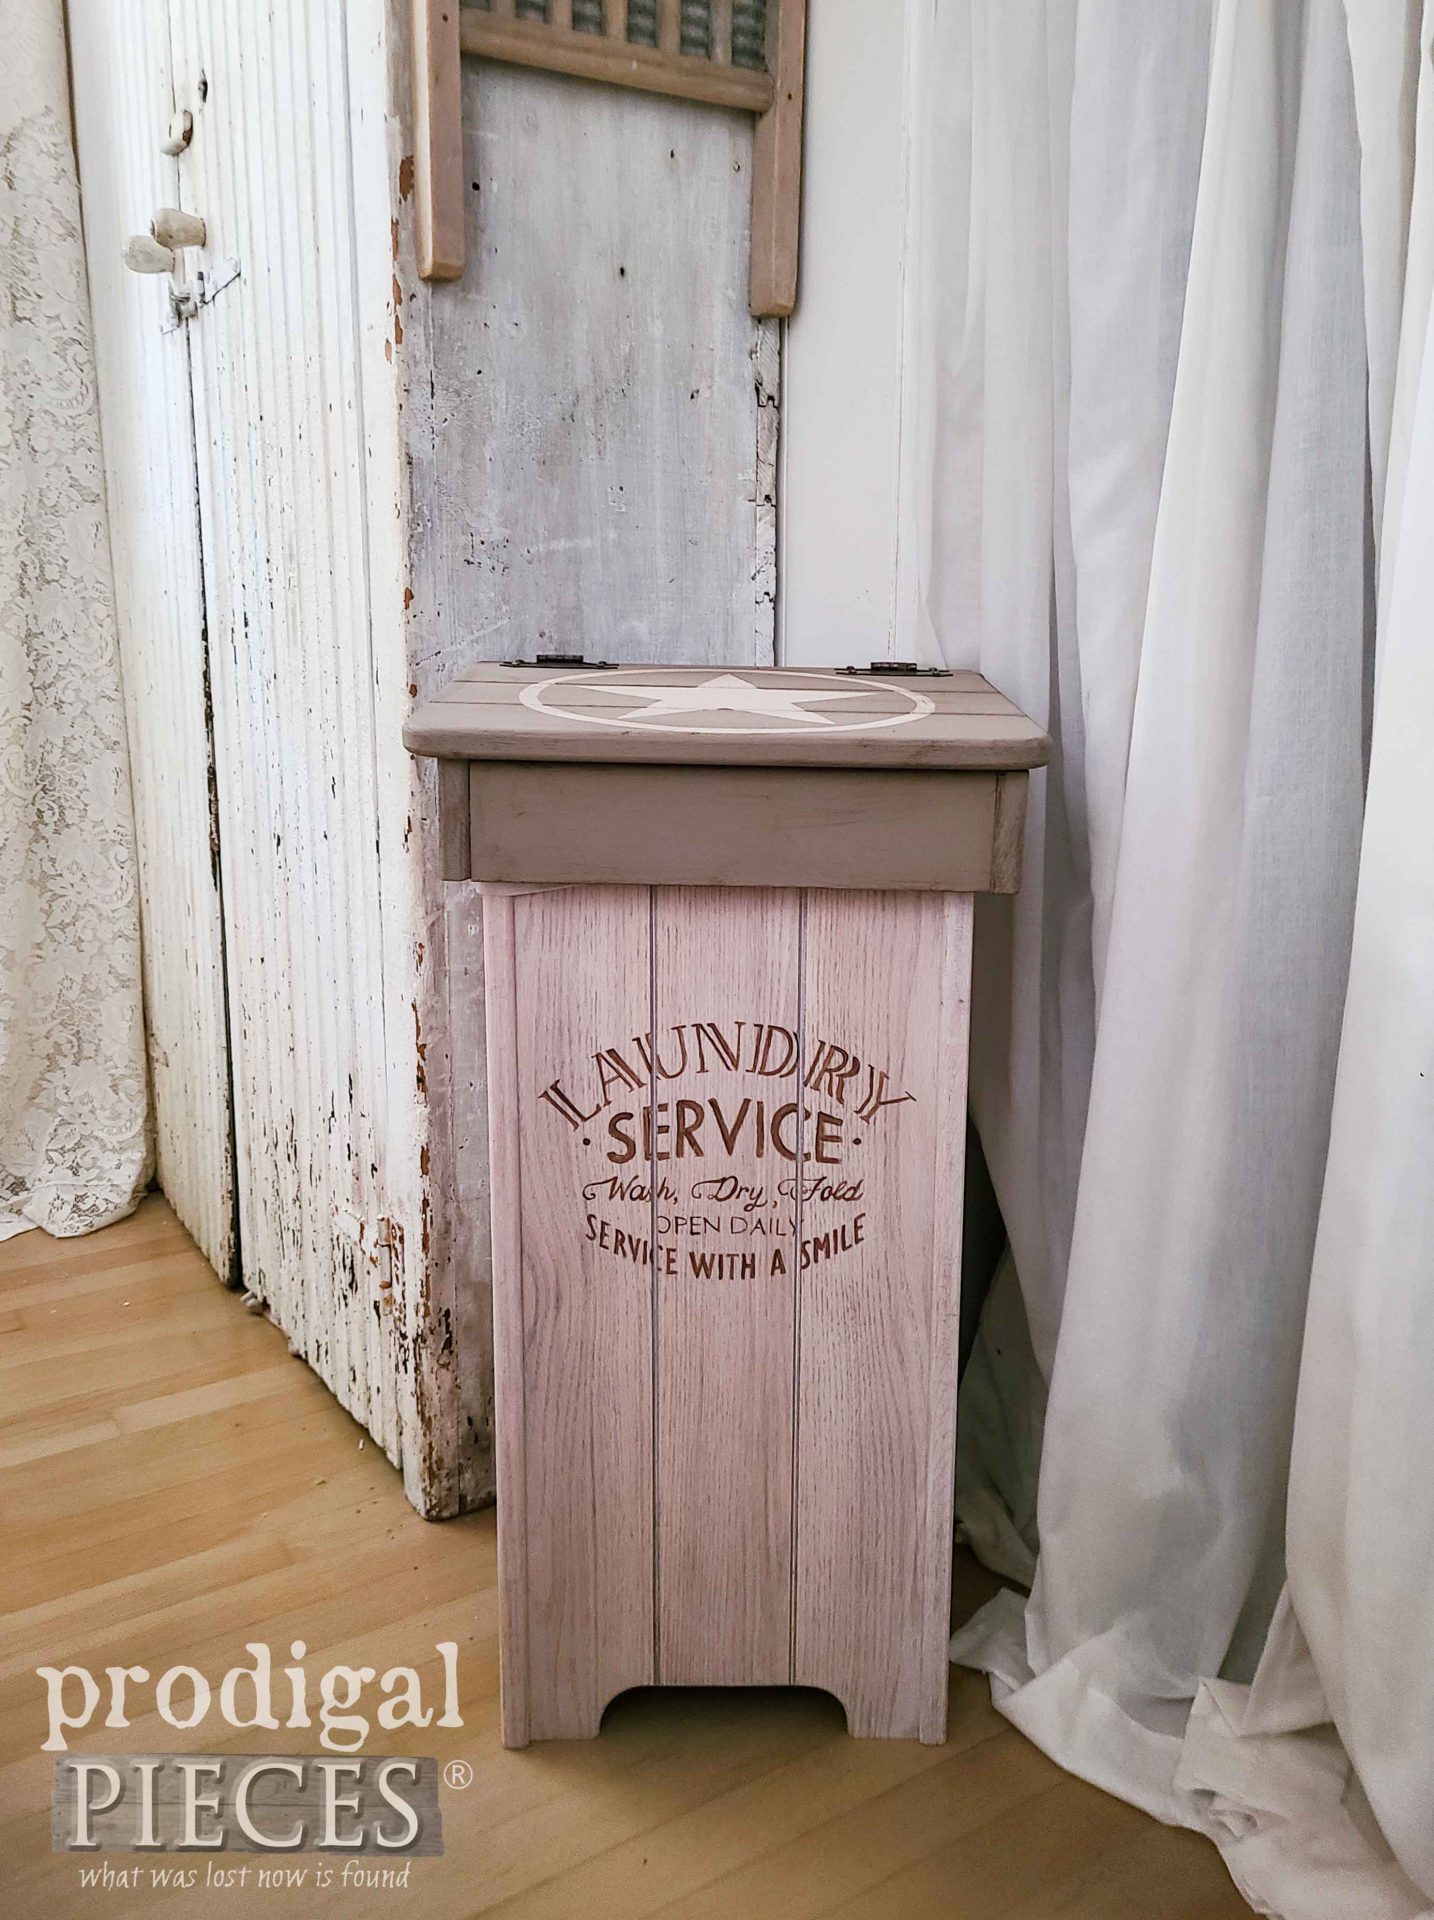 Rustic Farmhouse Laundry Bin from Upcycled Vintage Wooden Trash Bin by Larissa of Prodigal Pieces | prodigalpieces.com #prodigalpieces #farmhouse #laundry #diy #home